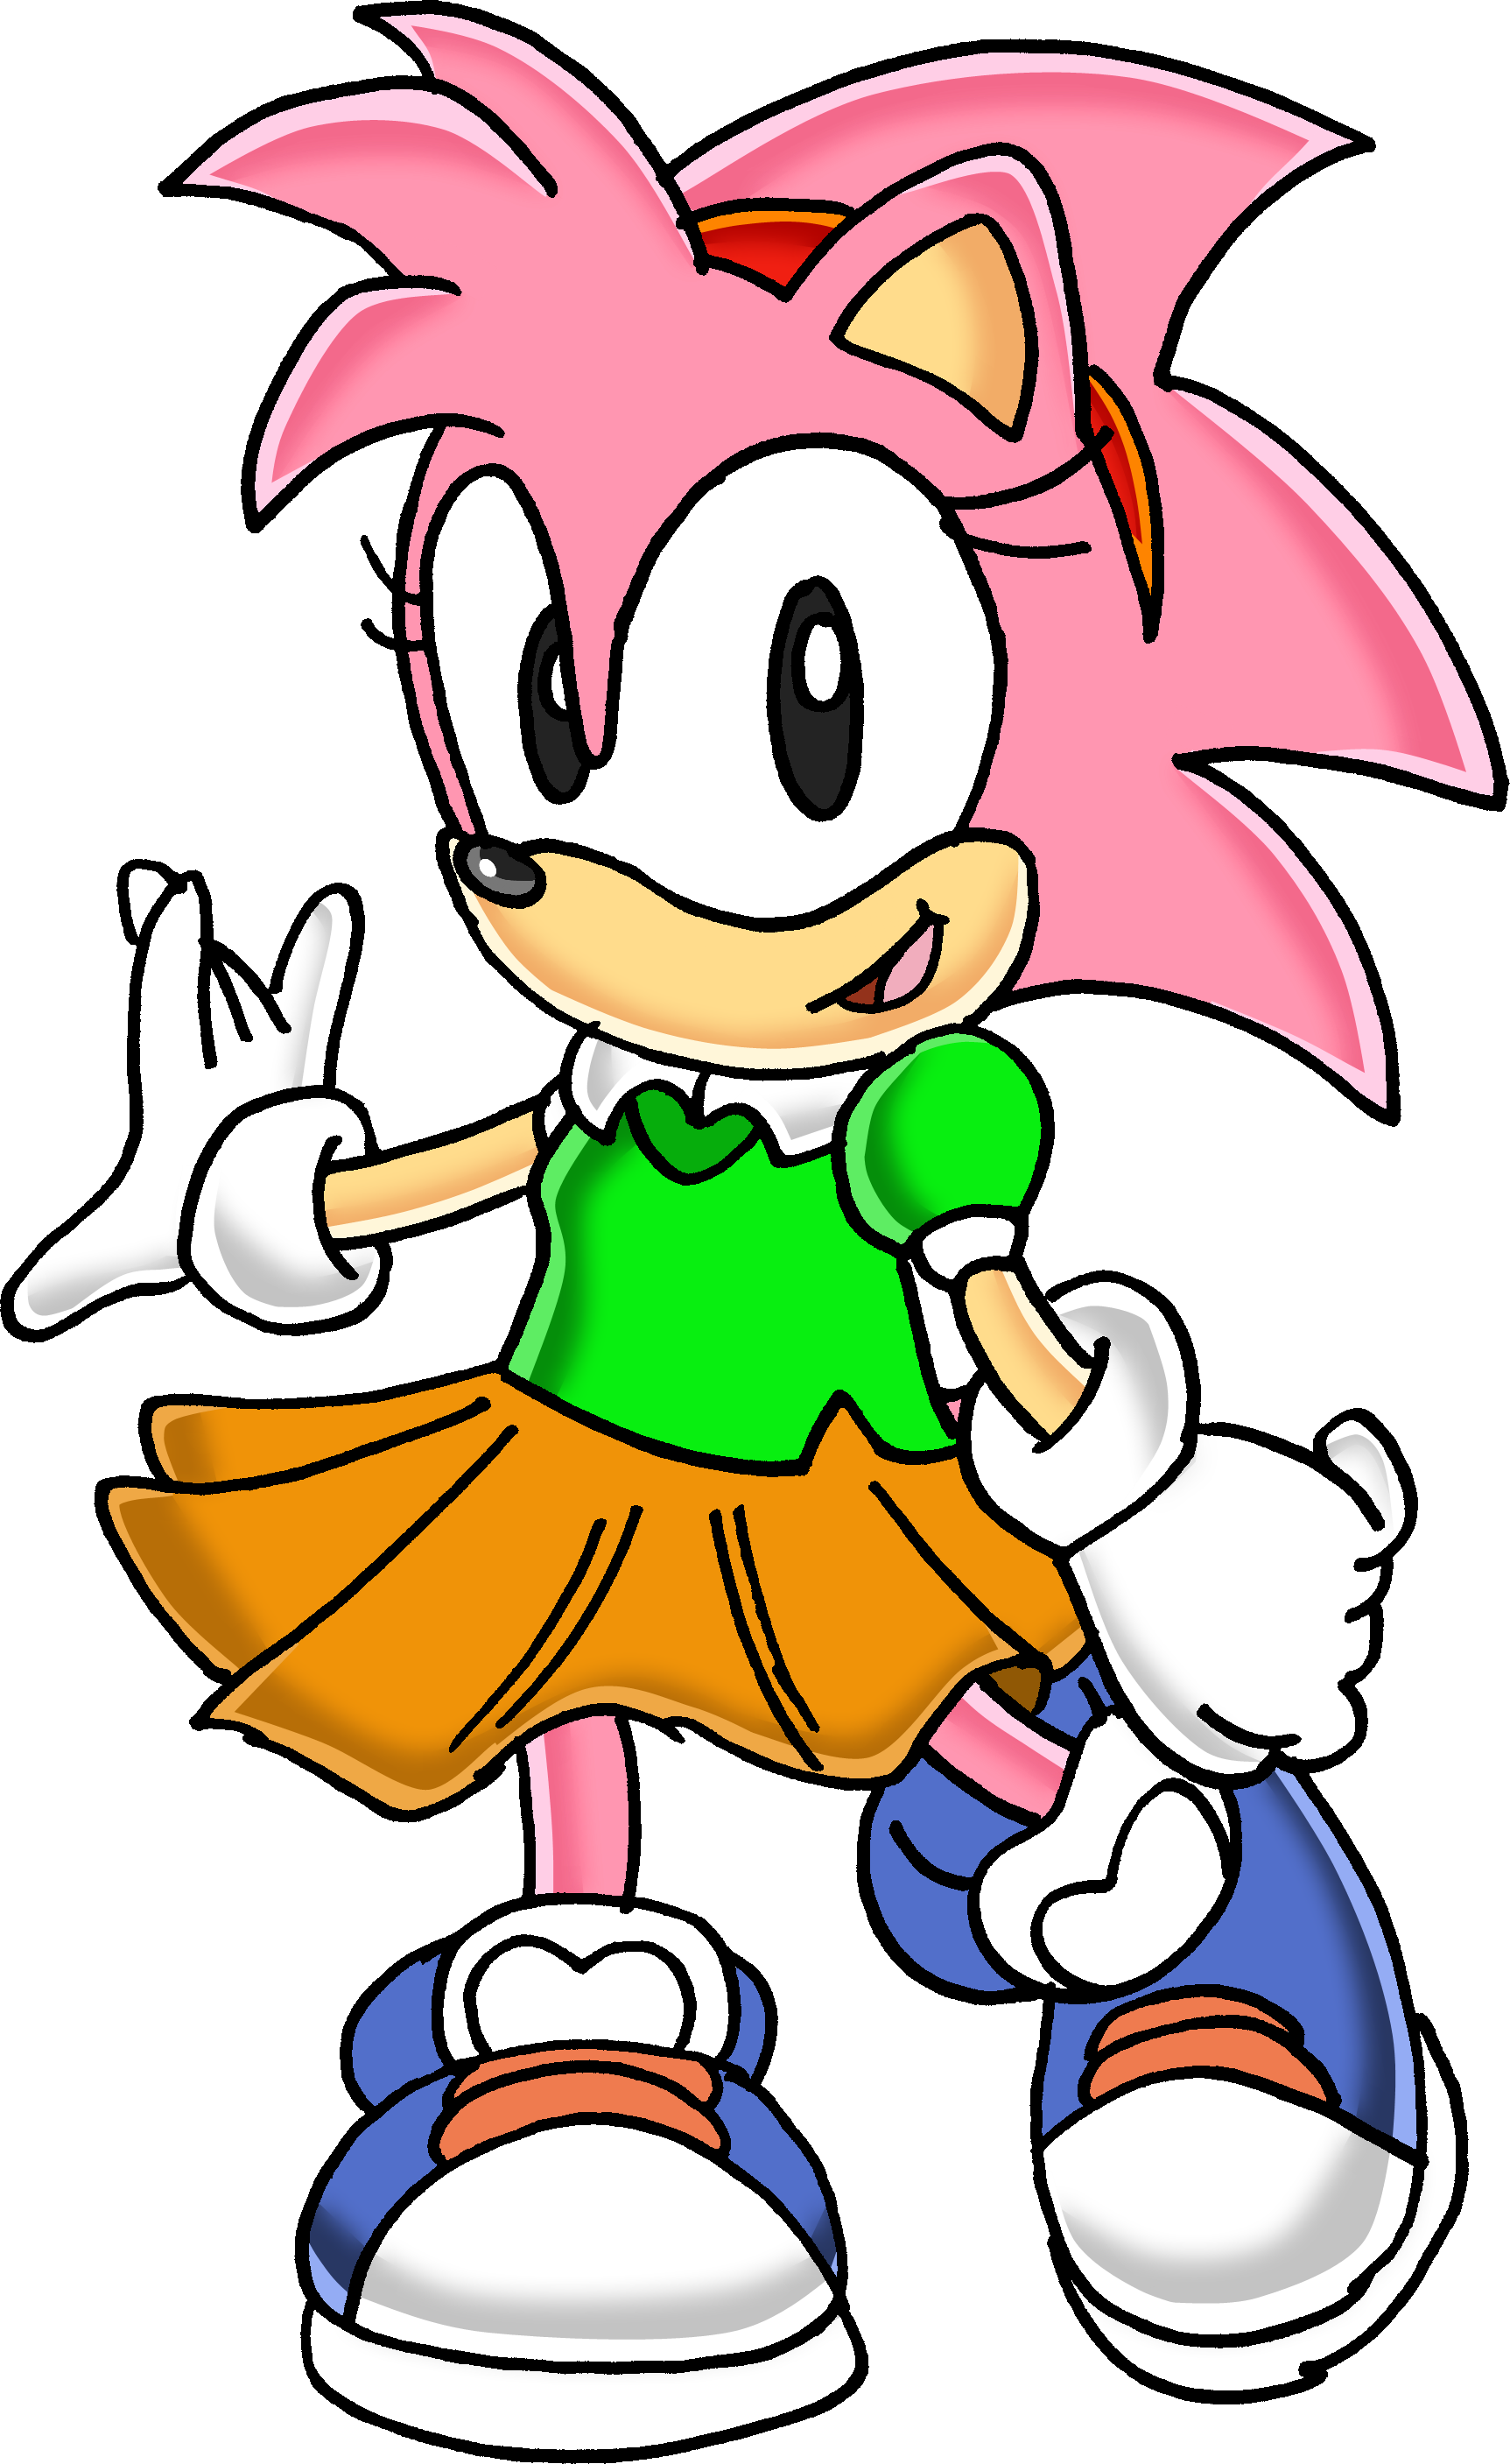 Amy rose  Amy rose, Sonic the movie, Sonic fan characters